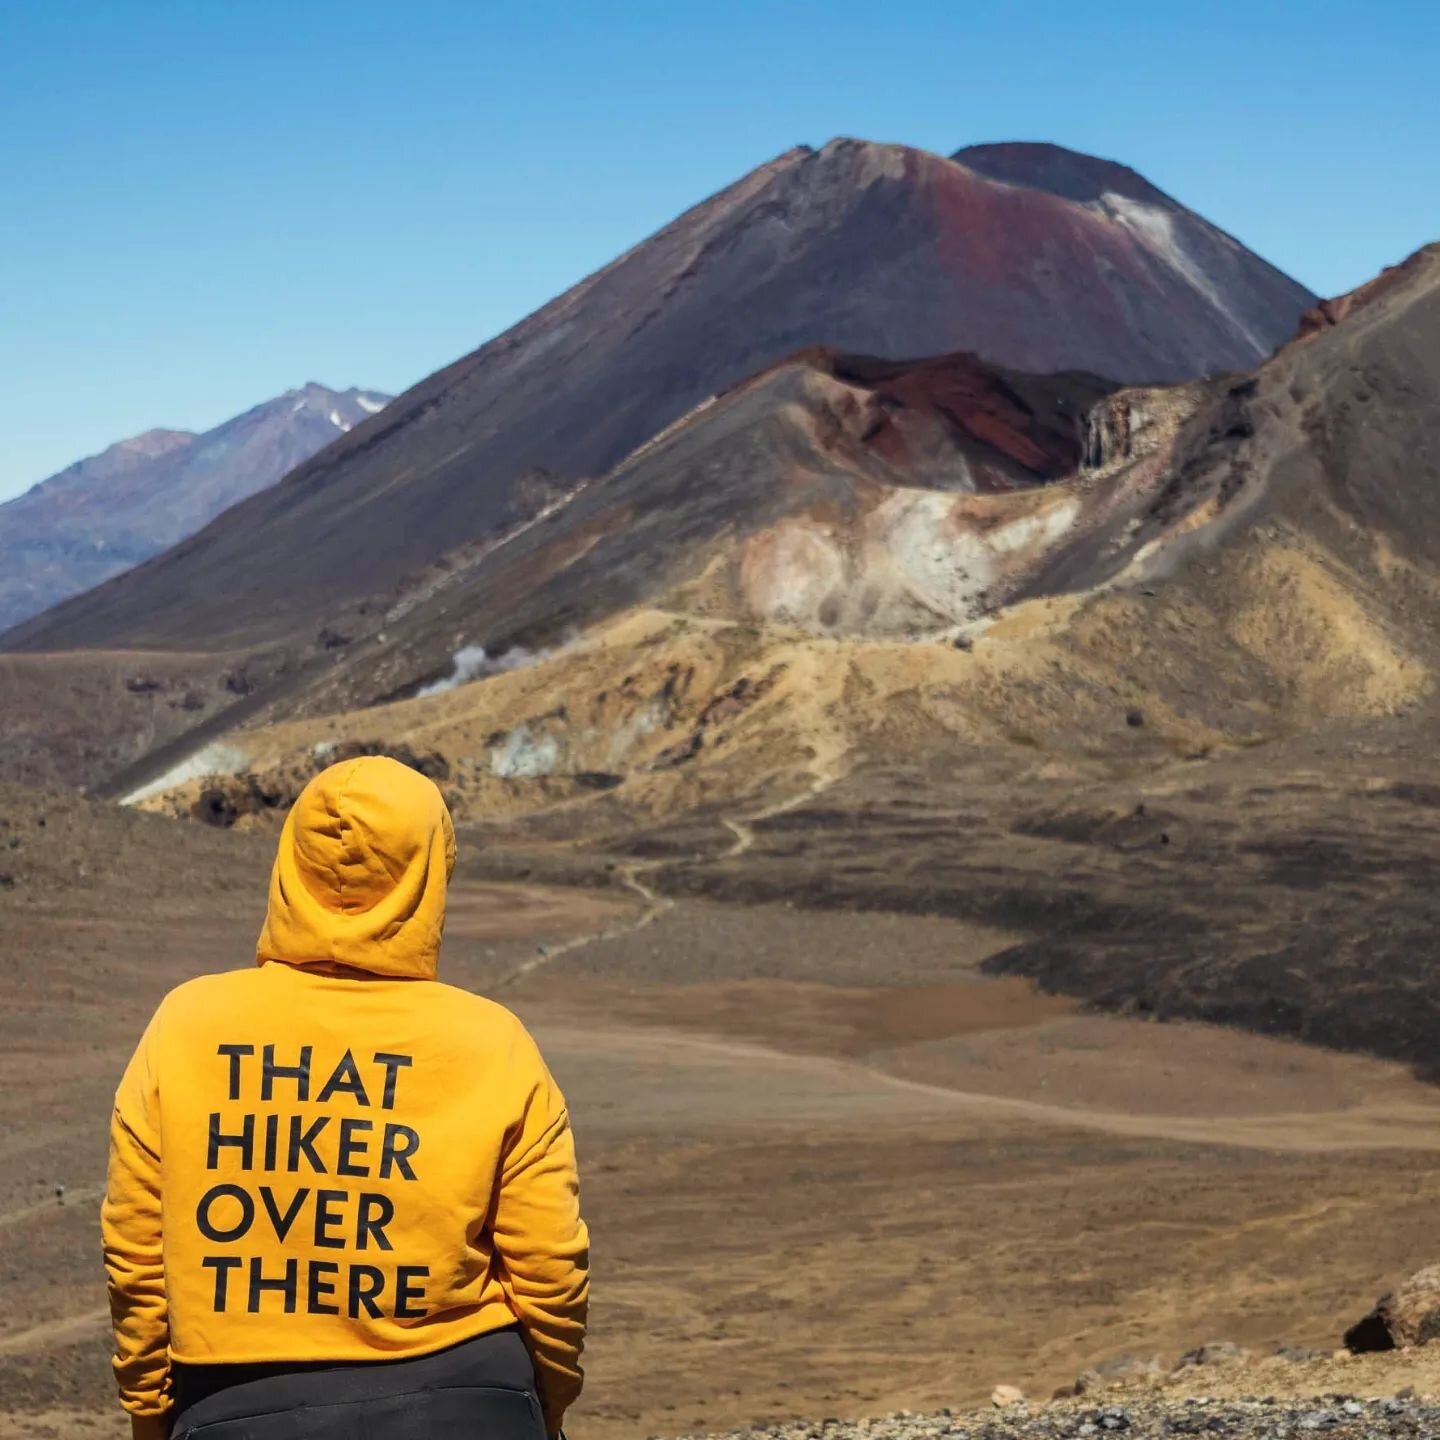 At long last, the THOT hoodies are really real and you can have your very own. You can also enjoy some photos of me awkwardly attempting to model this while hiking in New Zealand.